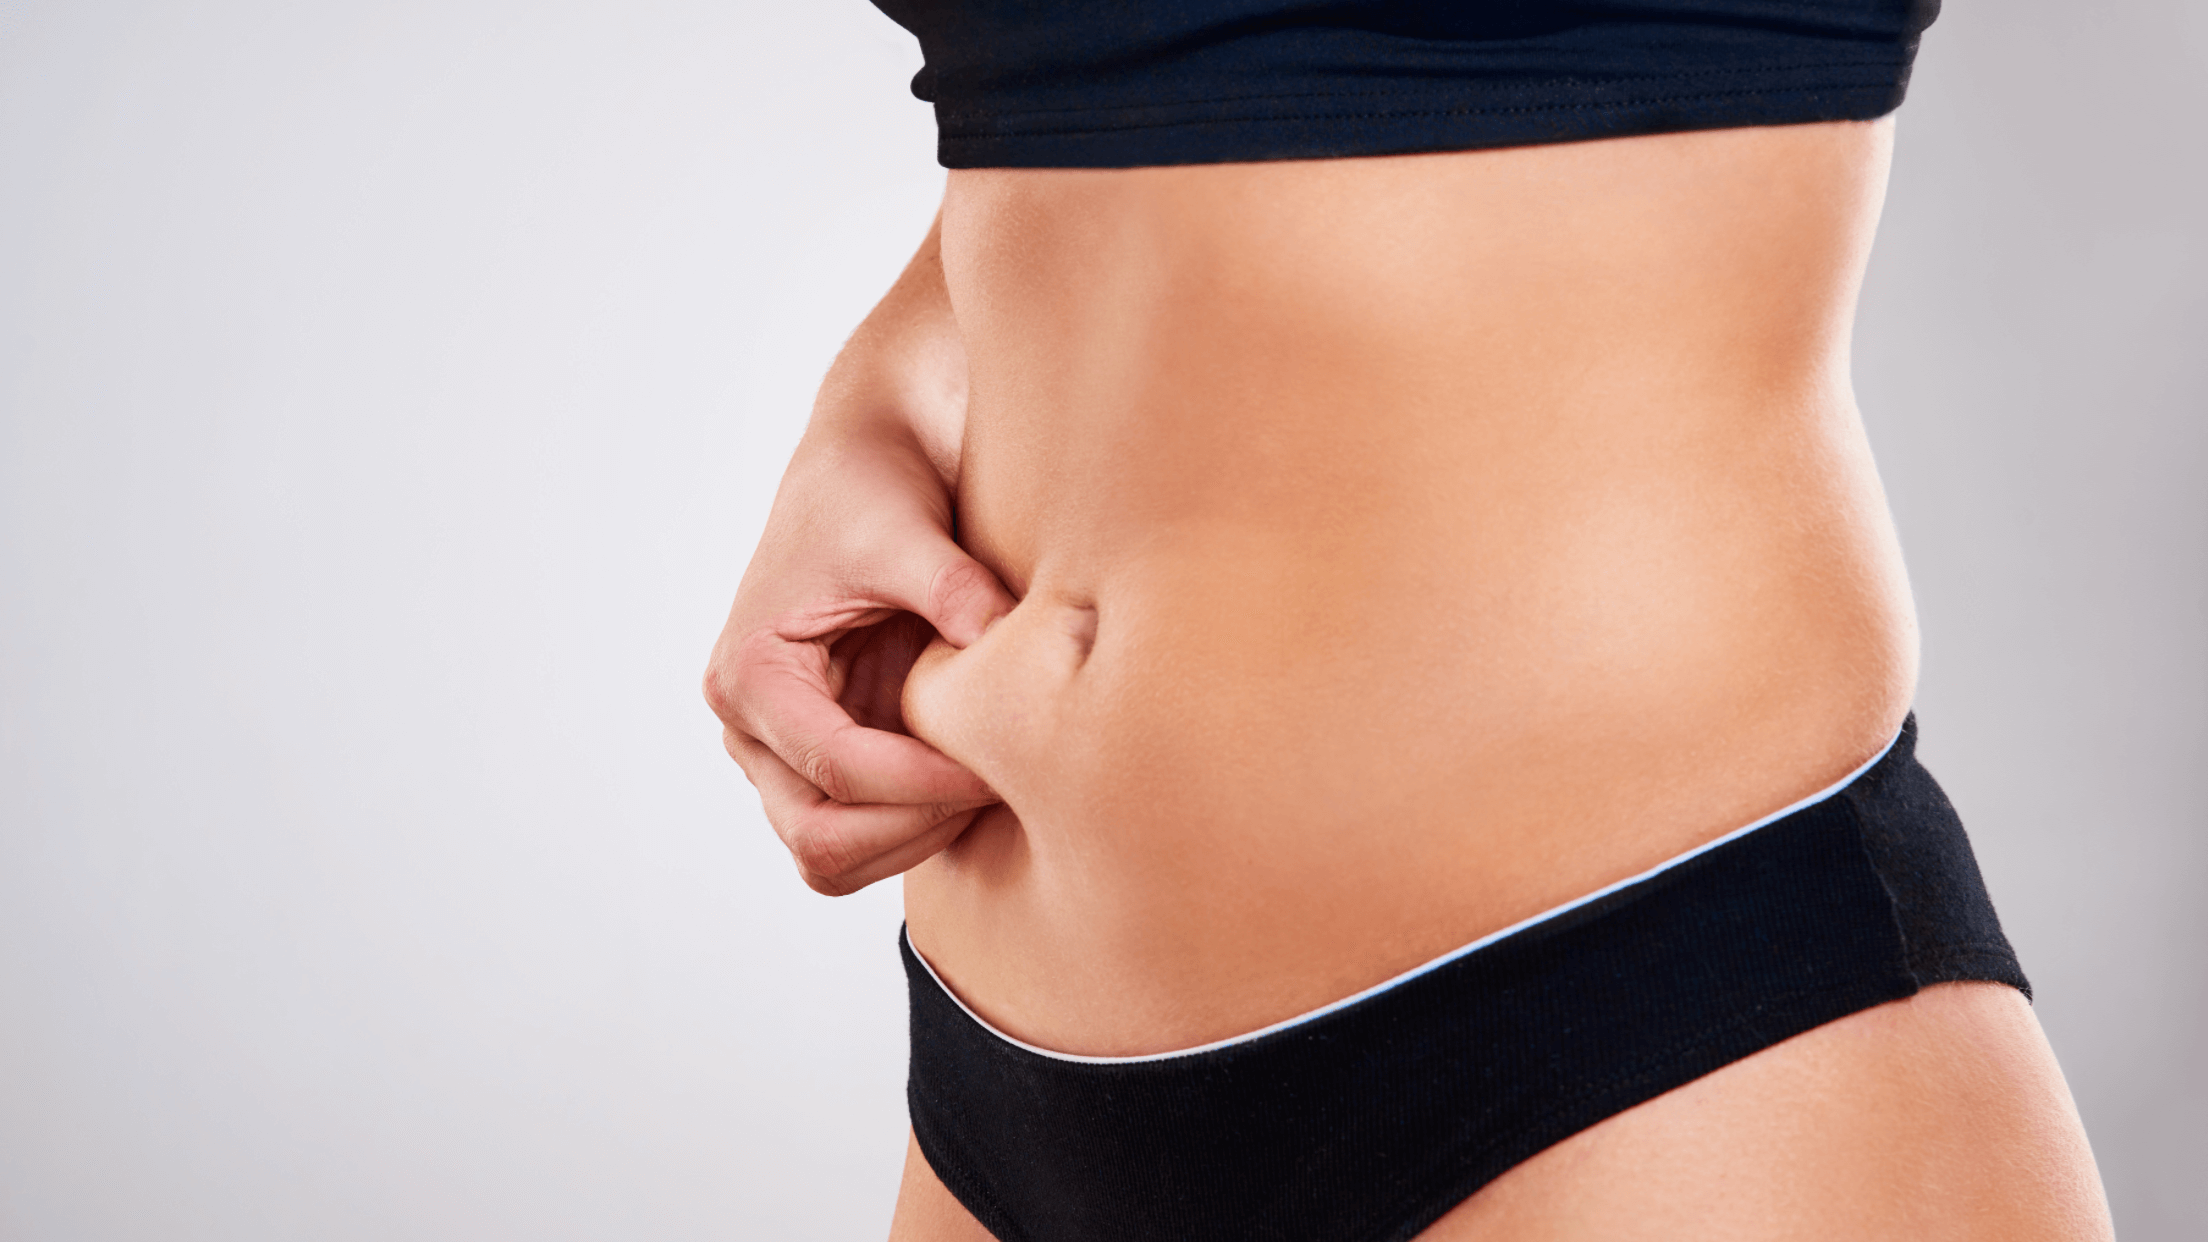 To-do List: How to Prepare for and Recover from Liposuction